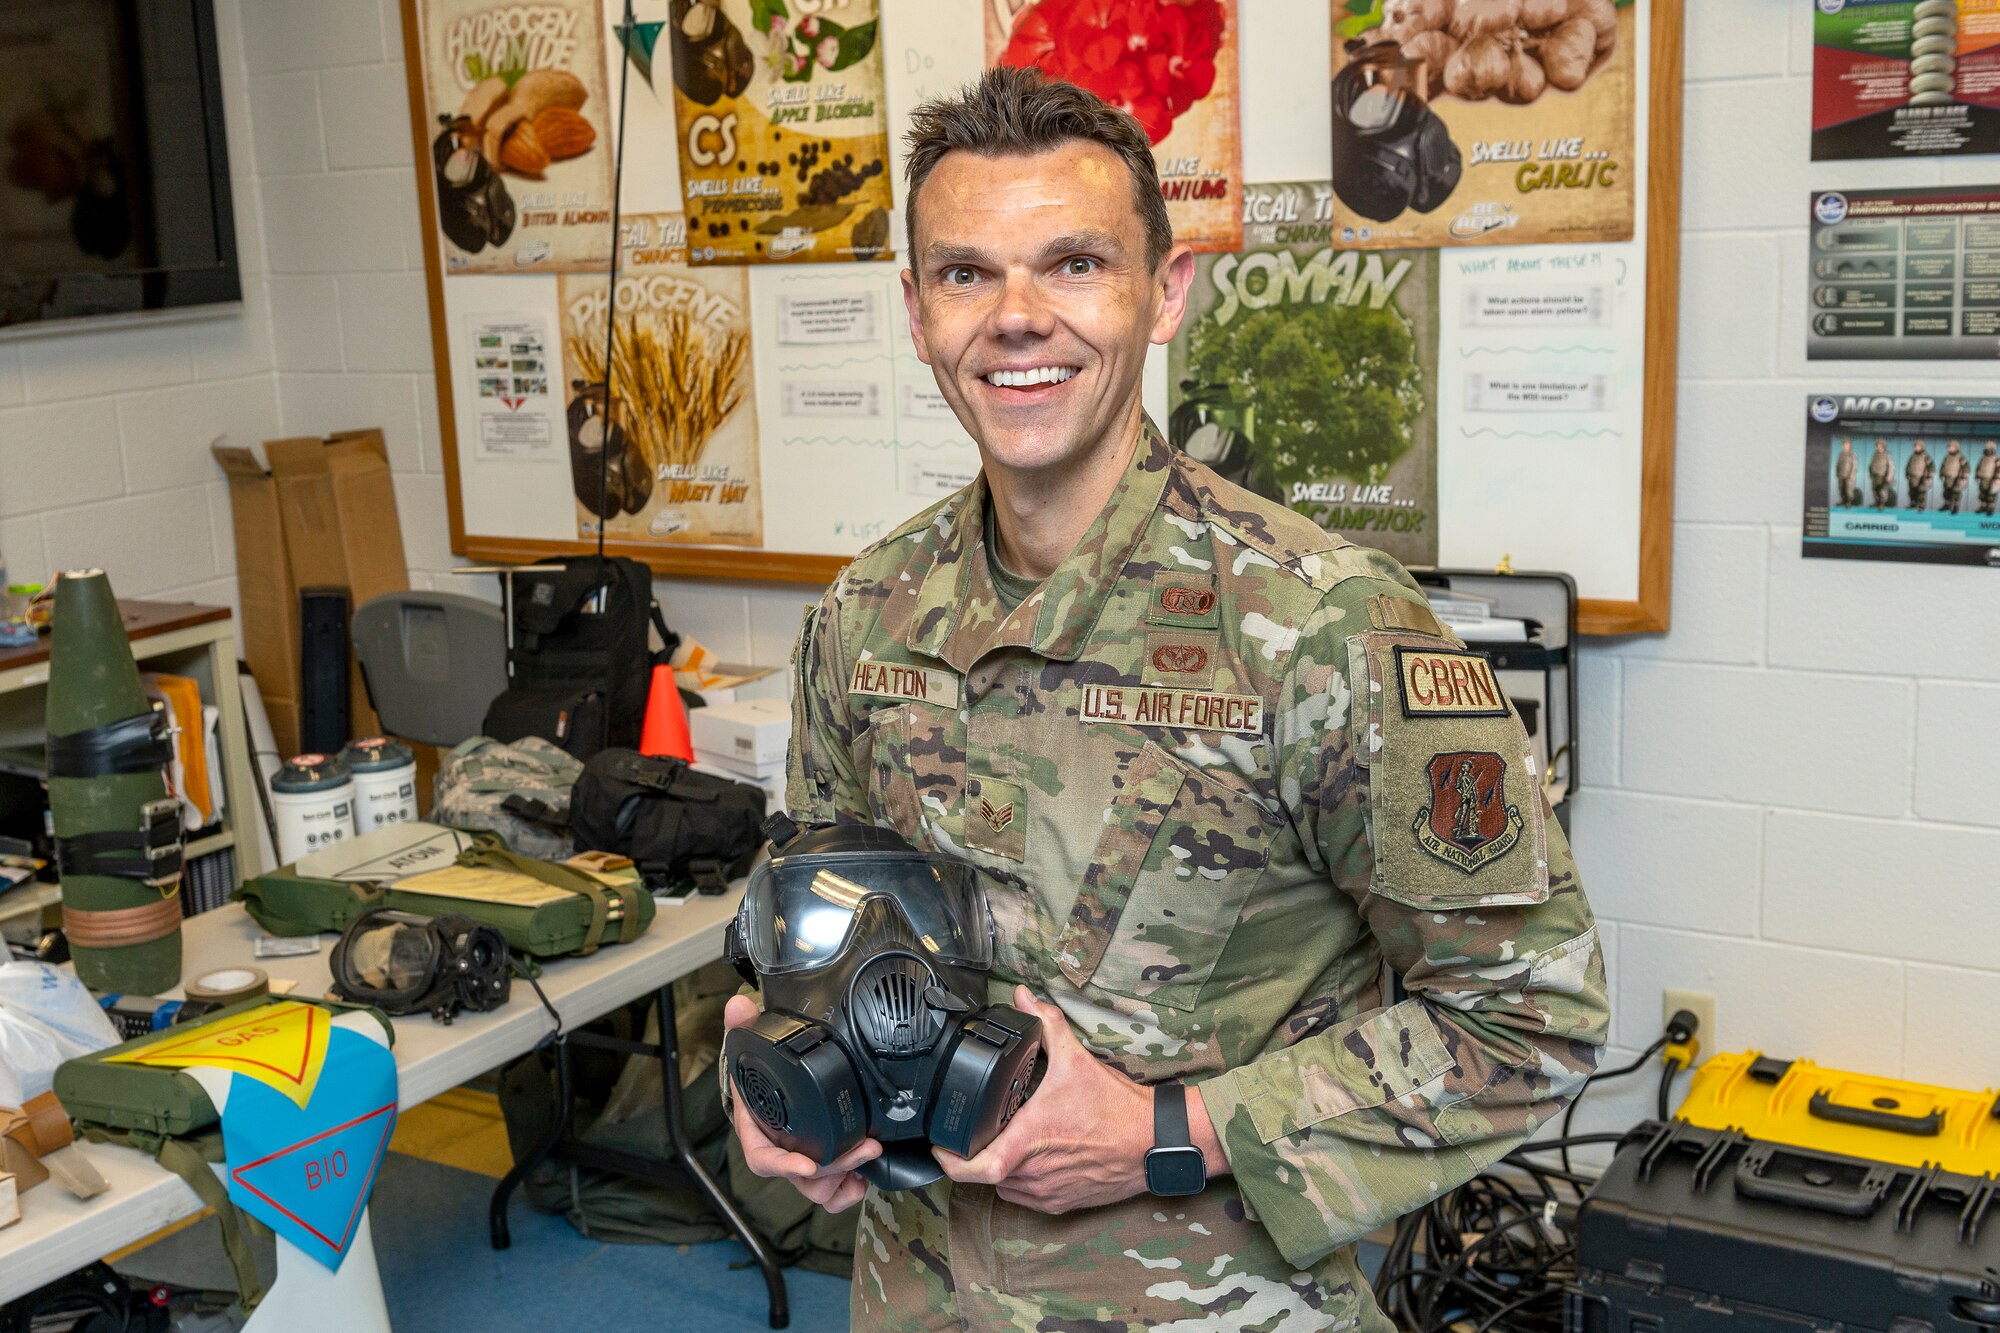 Senior Airman Steven Heaton is an emergency management specialist for the 167th Civil Engineering Squadron and the 167th Airlift Wing Airman Spotlight for the 167th Airlift Wing.